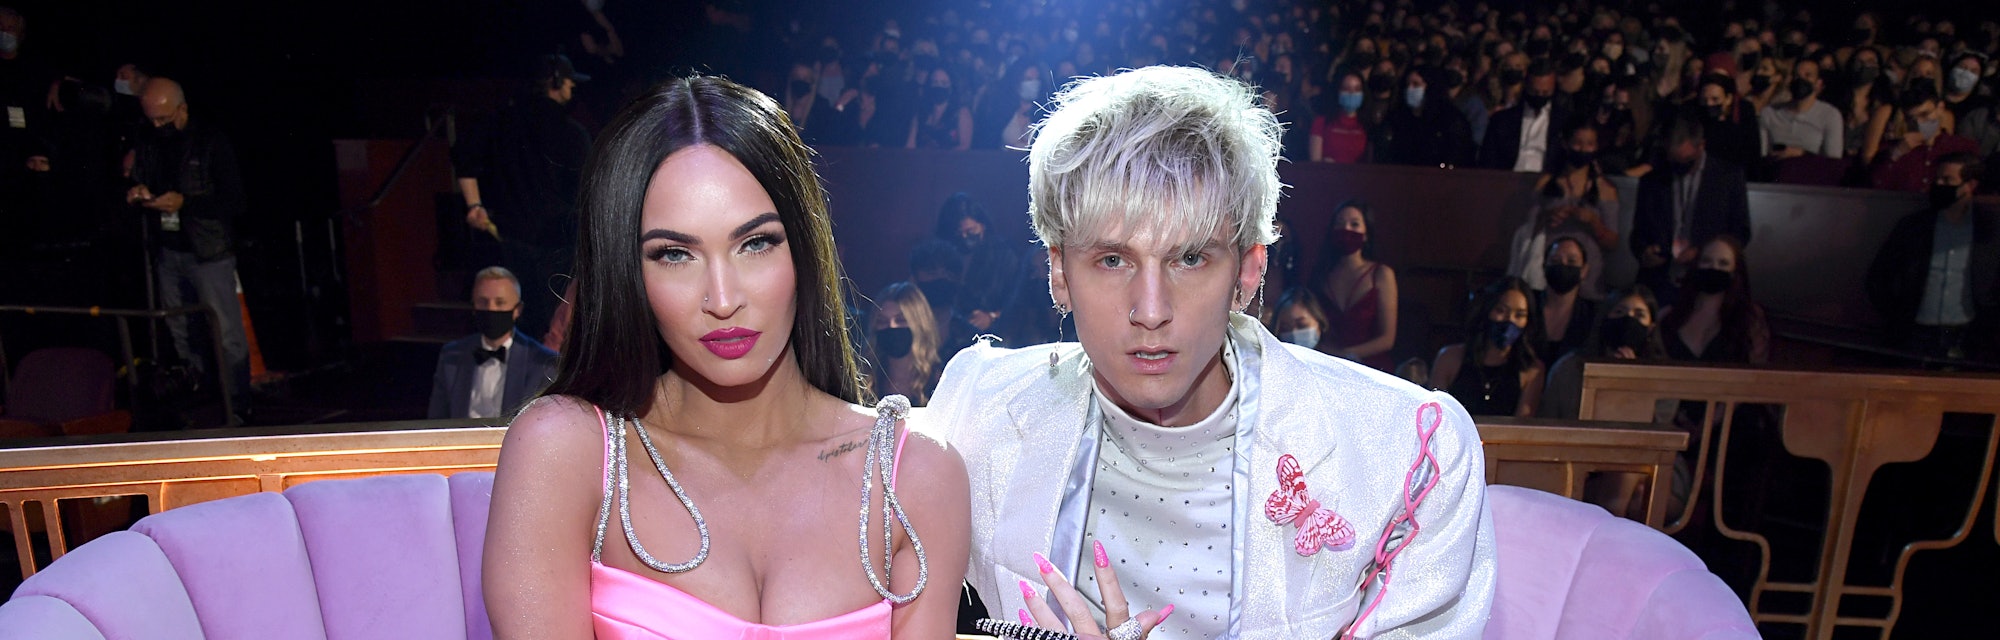 LOS ANGELES, CALIFORNIA - MAY 27: (EDITORIAL USE ONLY) (L-R) Megan Fox and Machine Gun Kelly attend ...